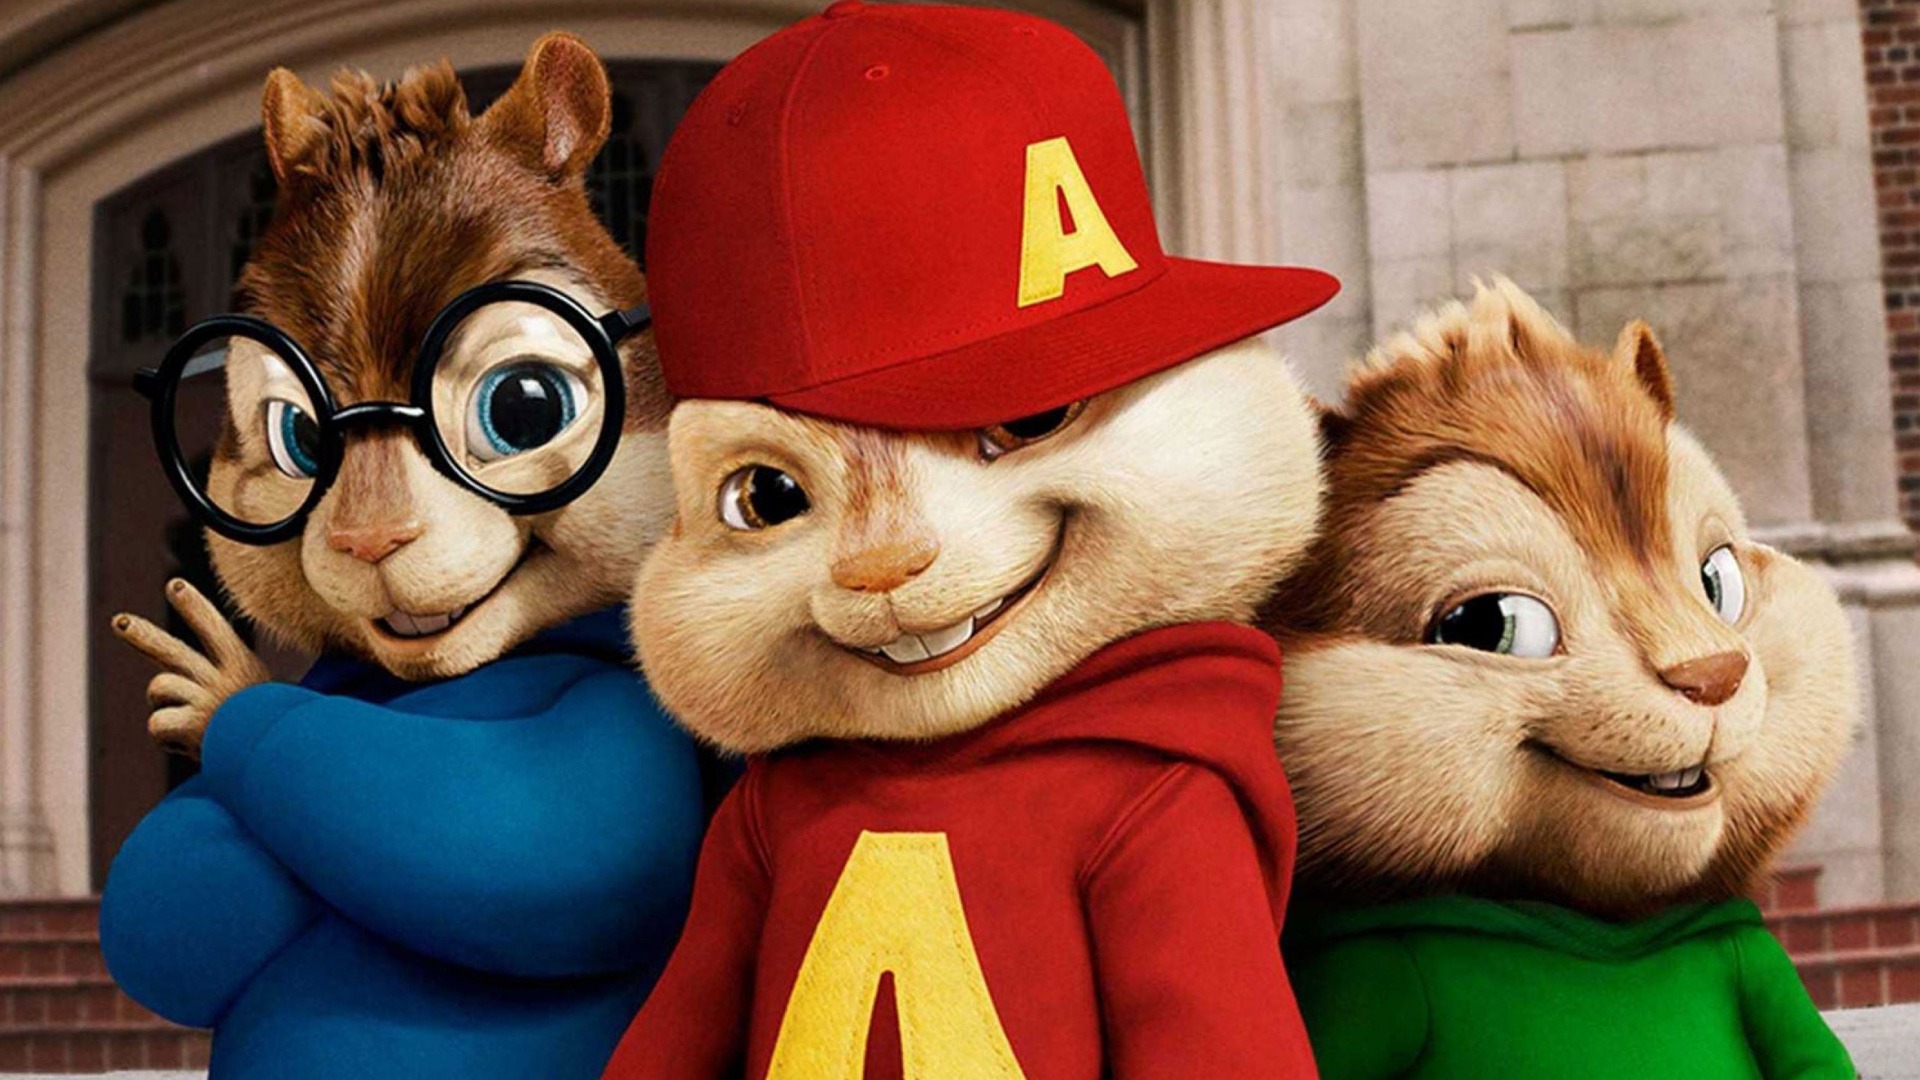 Alvin and the Chipmunks Images. 